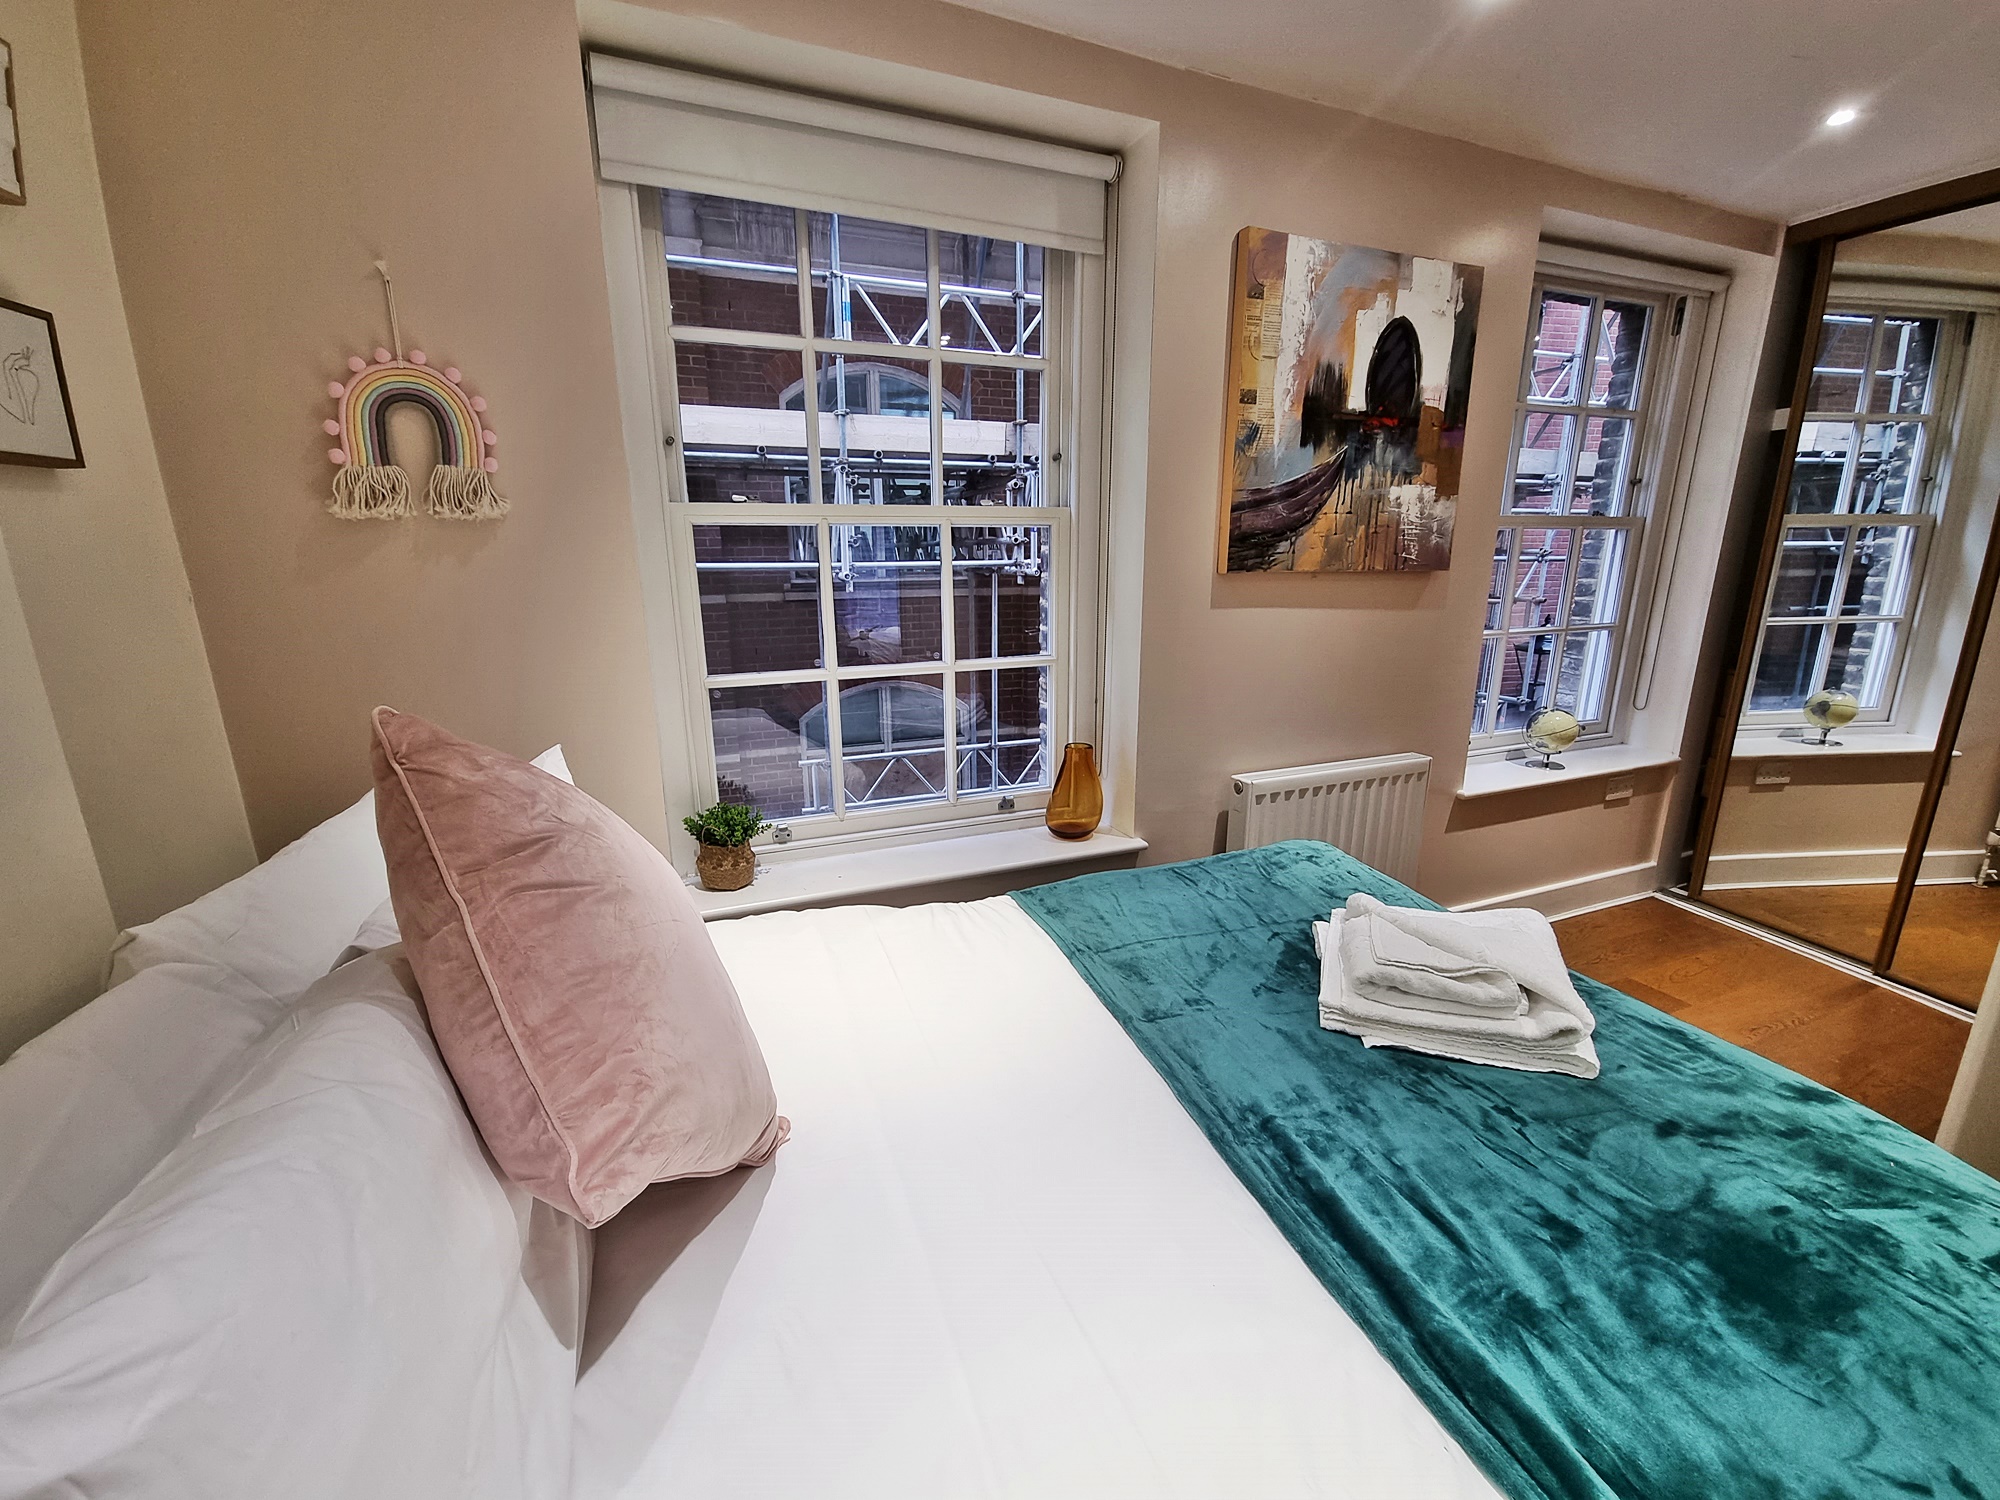 Liverpool-Street-Serviced-Accommodation-London-City-close-to-tourist-sights-and-tube-station---fully-furnished,-all-bills-included.-Urban-Stay-3